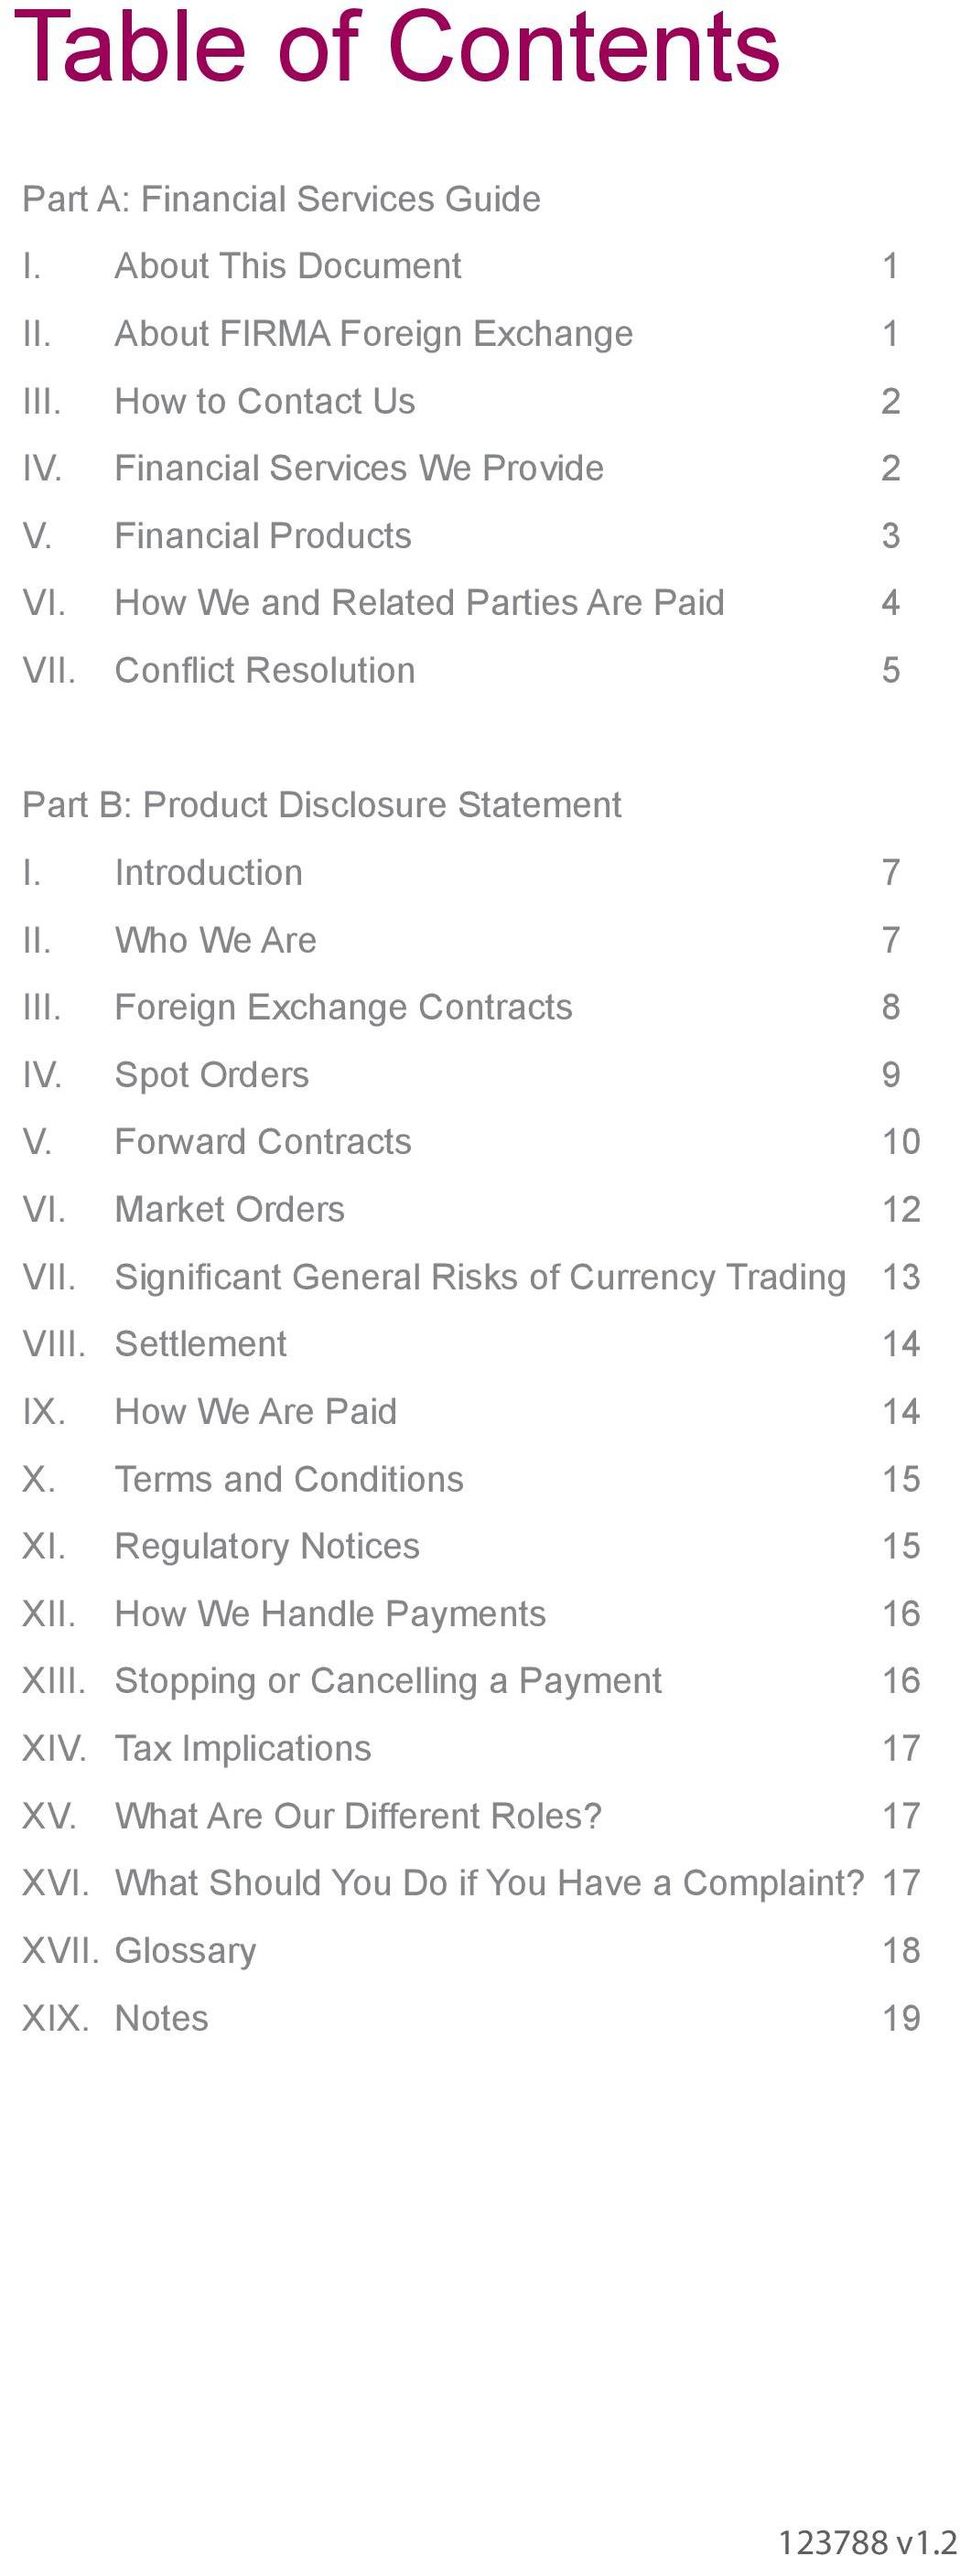 Forward Contracts 10 VI. Market Orders 12 VII. Significant General Risks of Currency Trading 13 VIII. Settlement 14 IX. How We Are Paid 14 X. Terms and Conditions 15 XI. Regulatory Notices 15 XII.